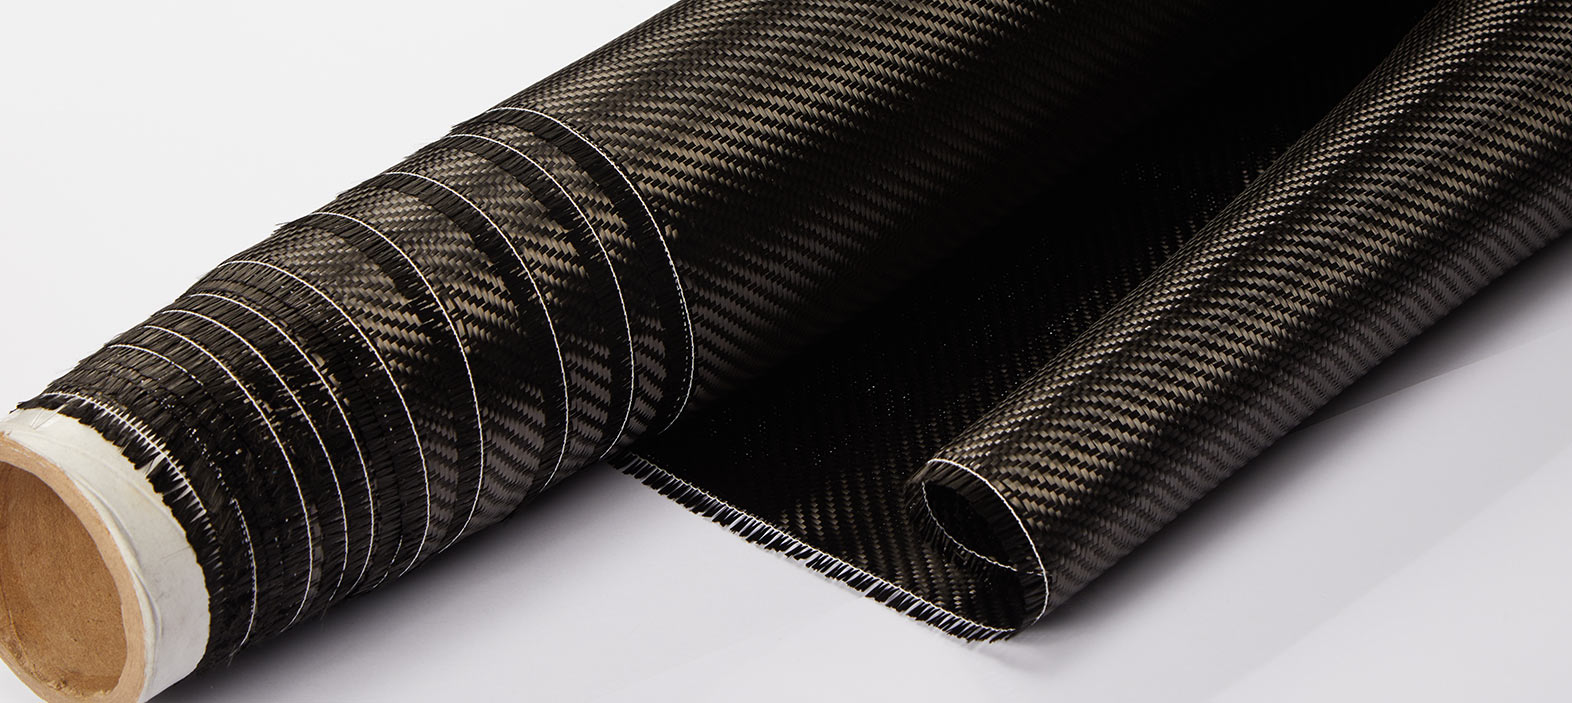 Why Epoxy Resin Is Used In Manufacturing Carbon Fiber Products? -  NitProcomposites